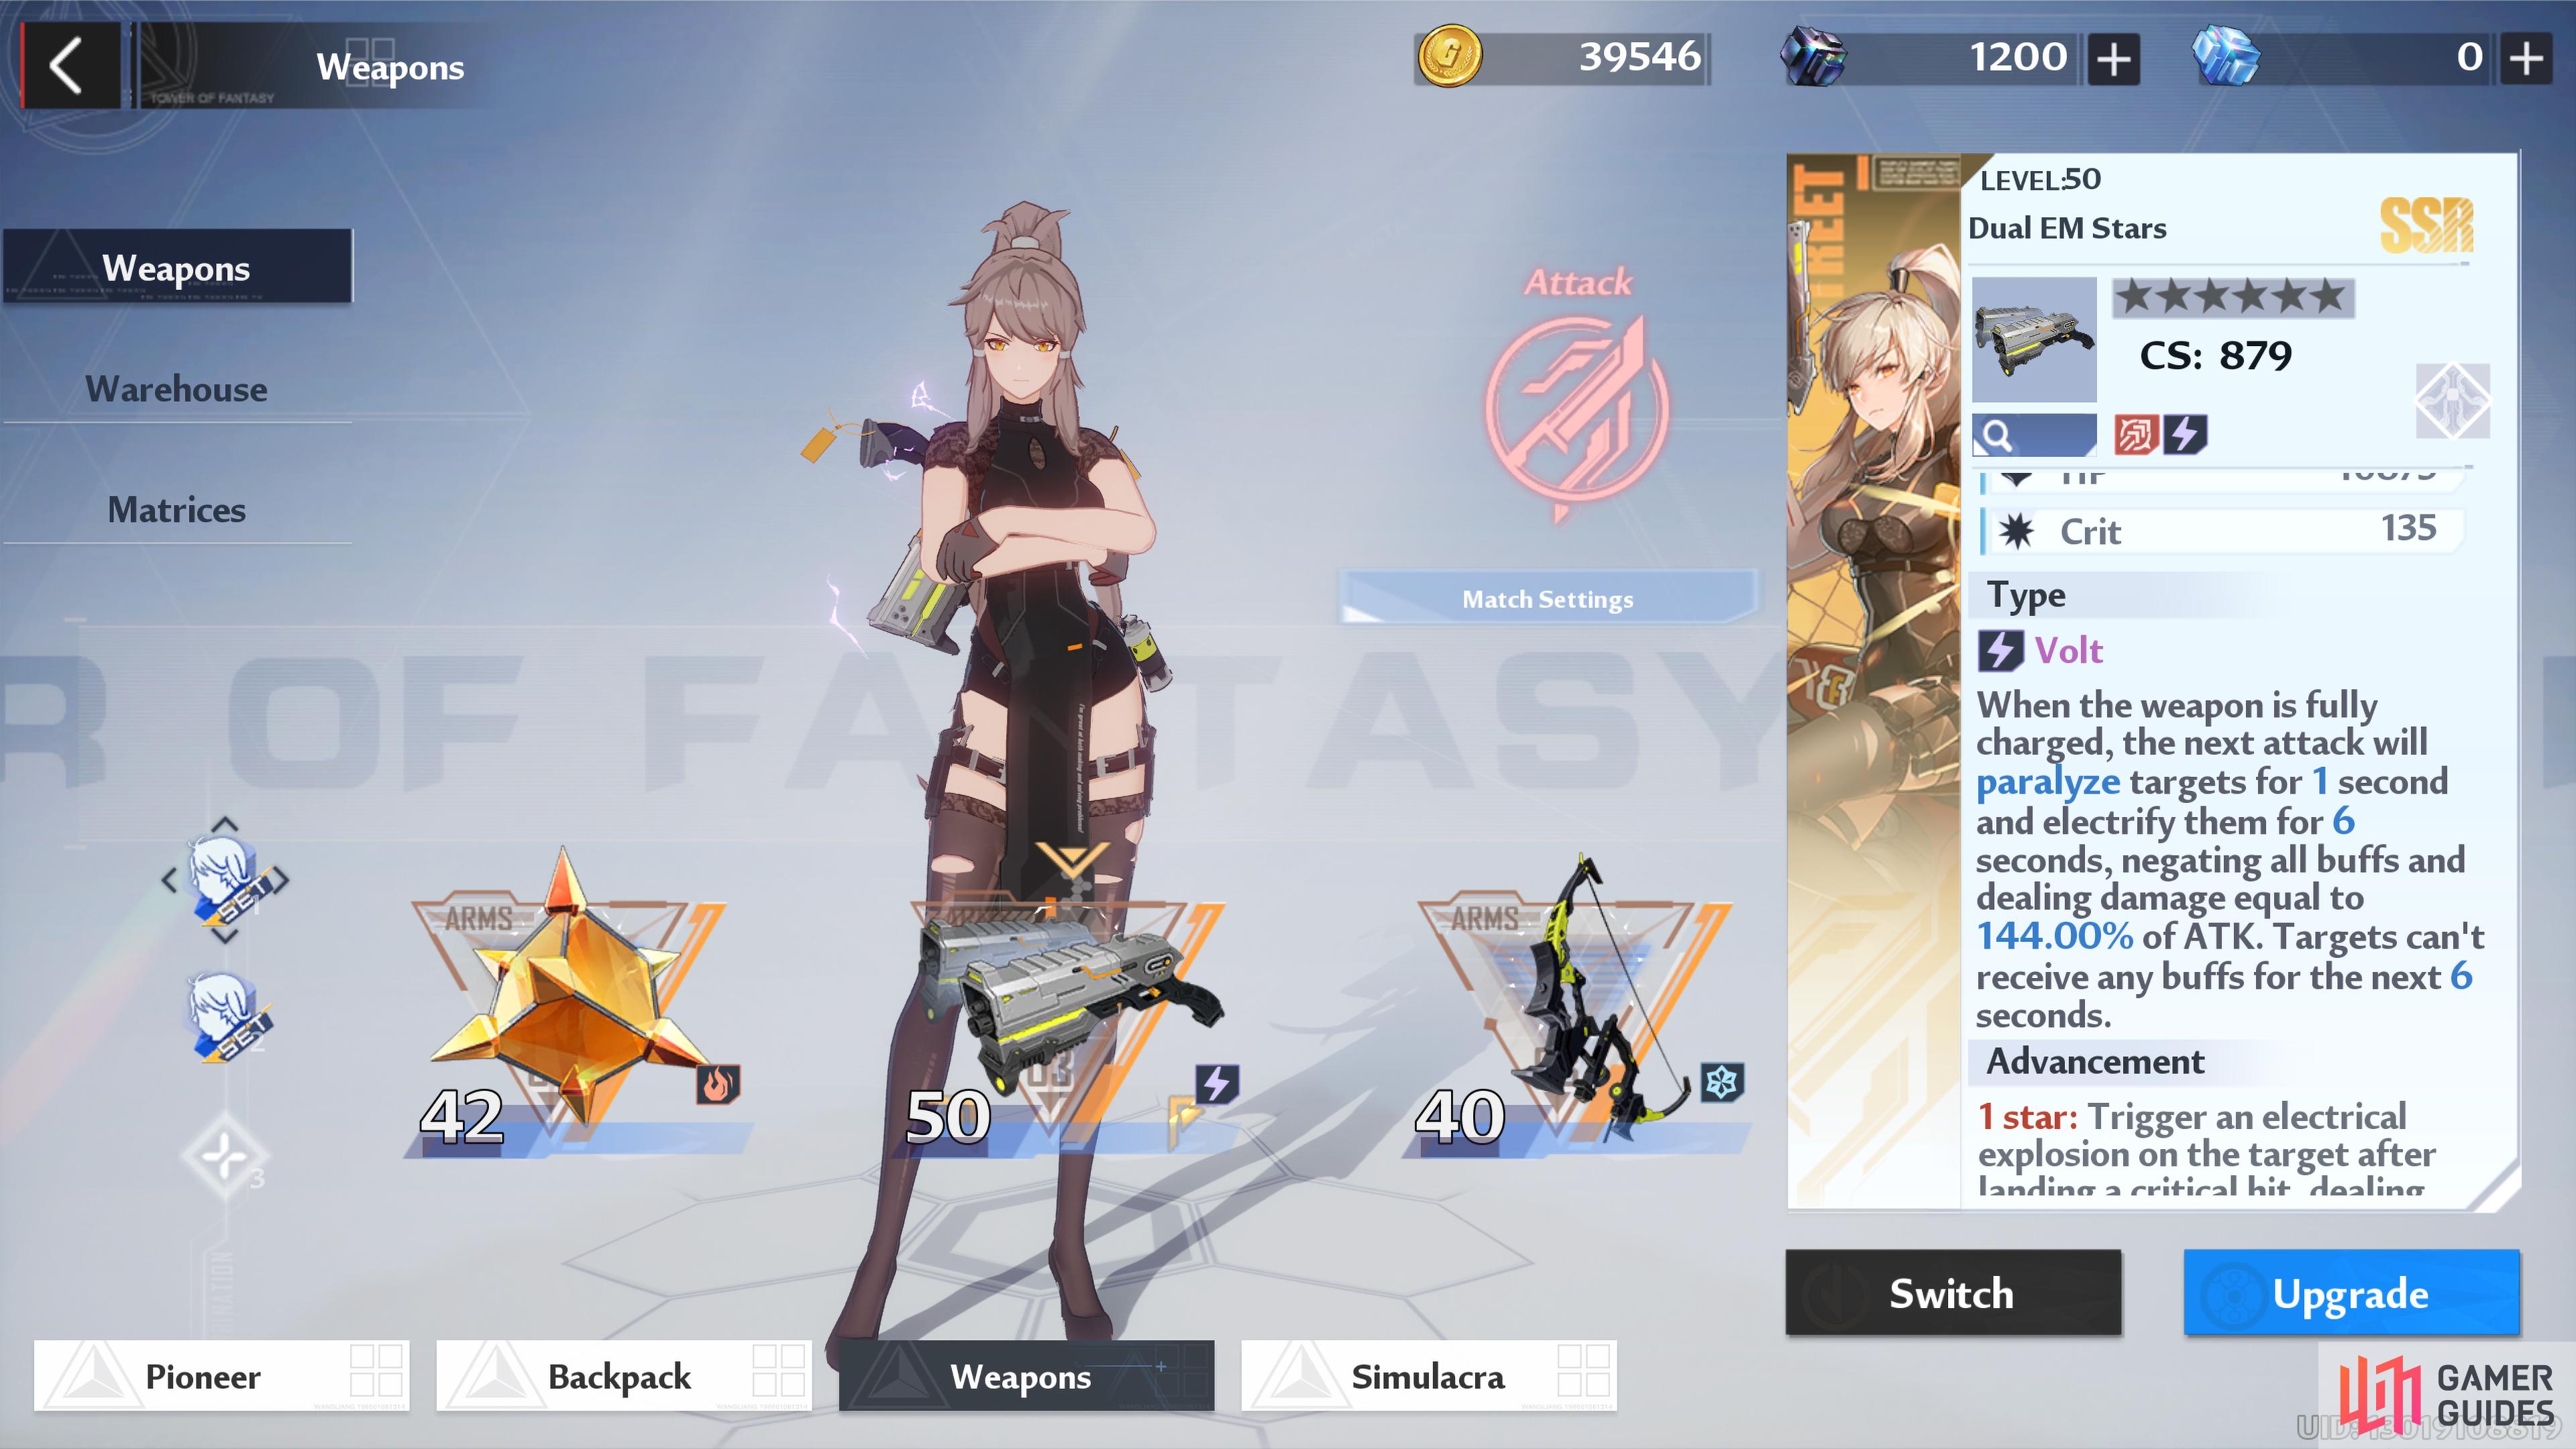 How to create :3 bunny face in Tower of Fantasy character customization —  Escorenews